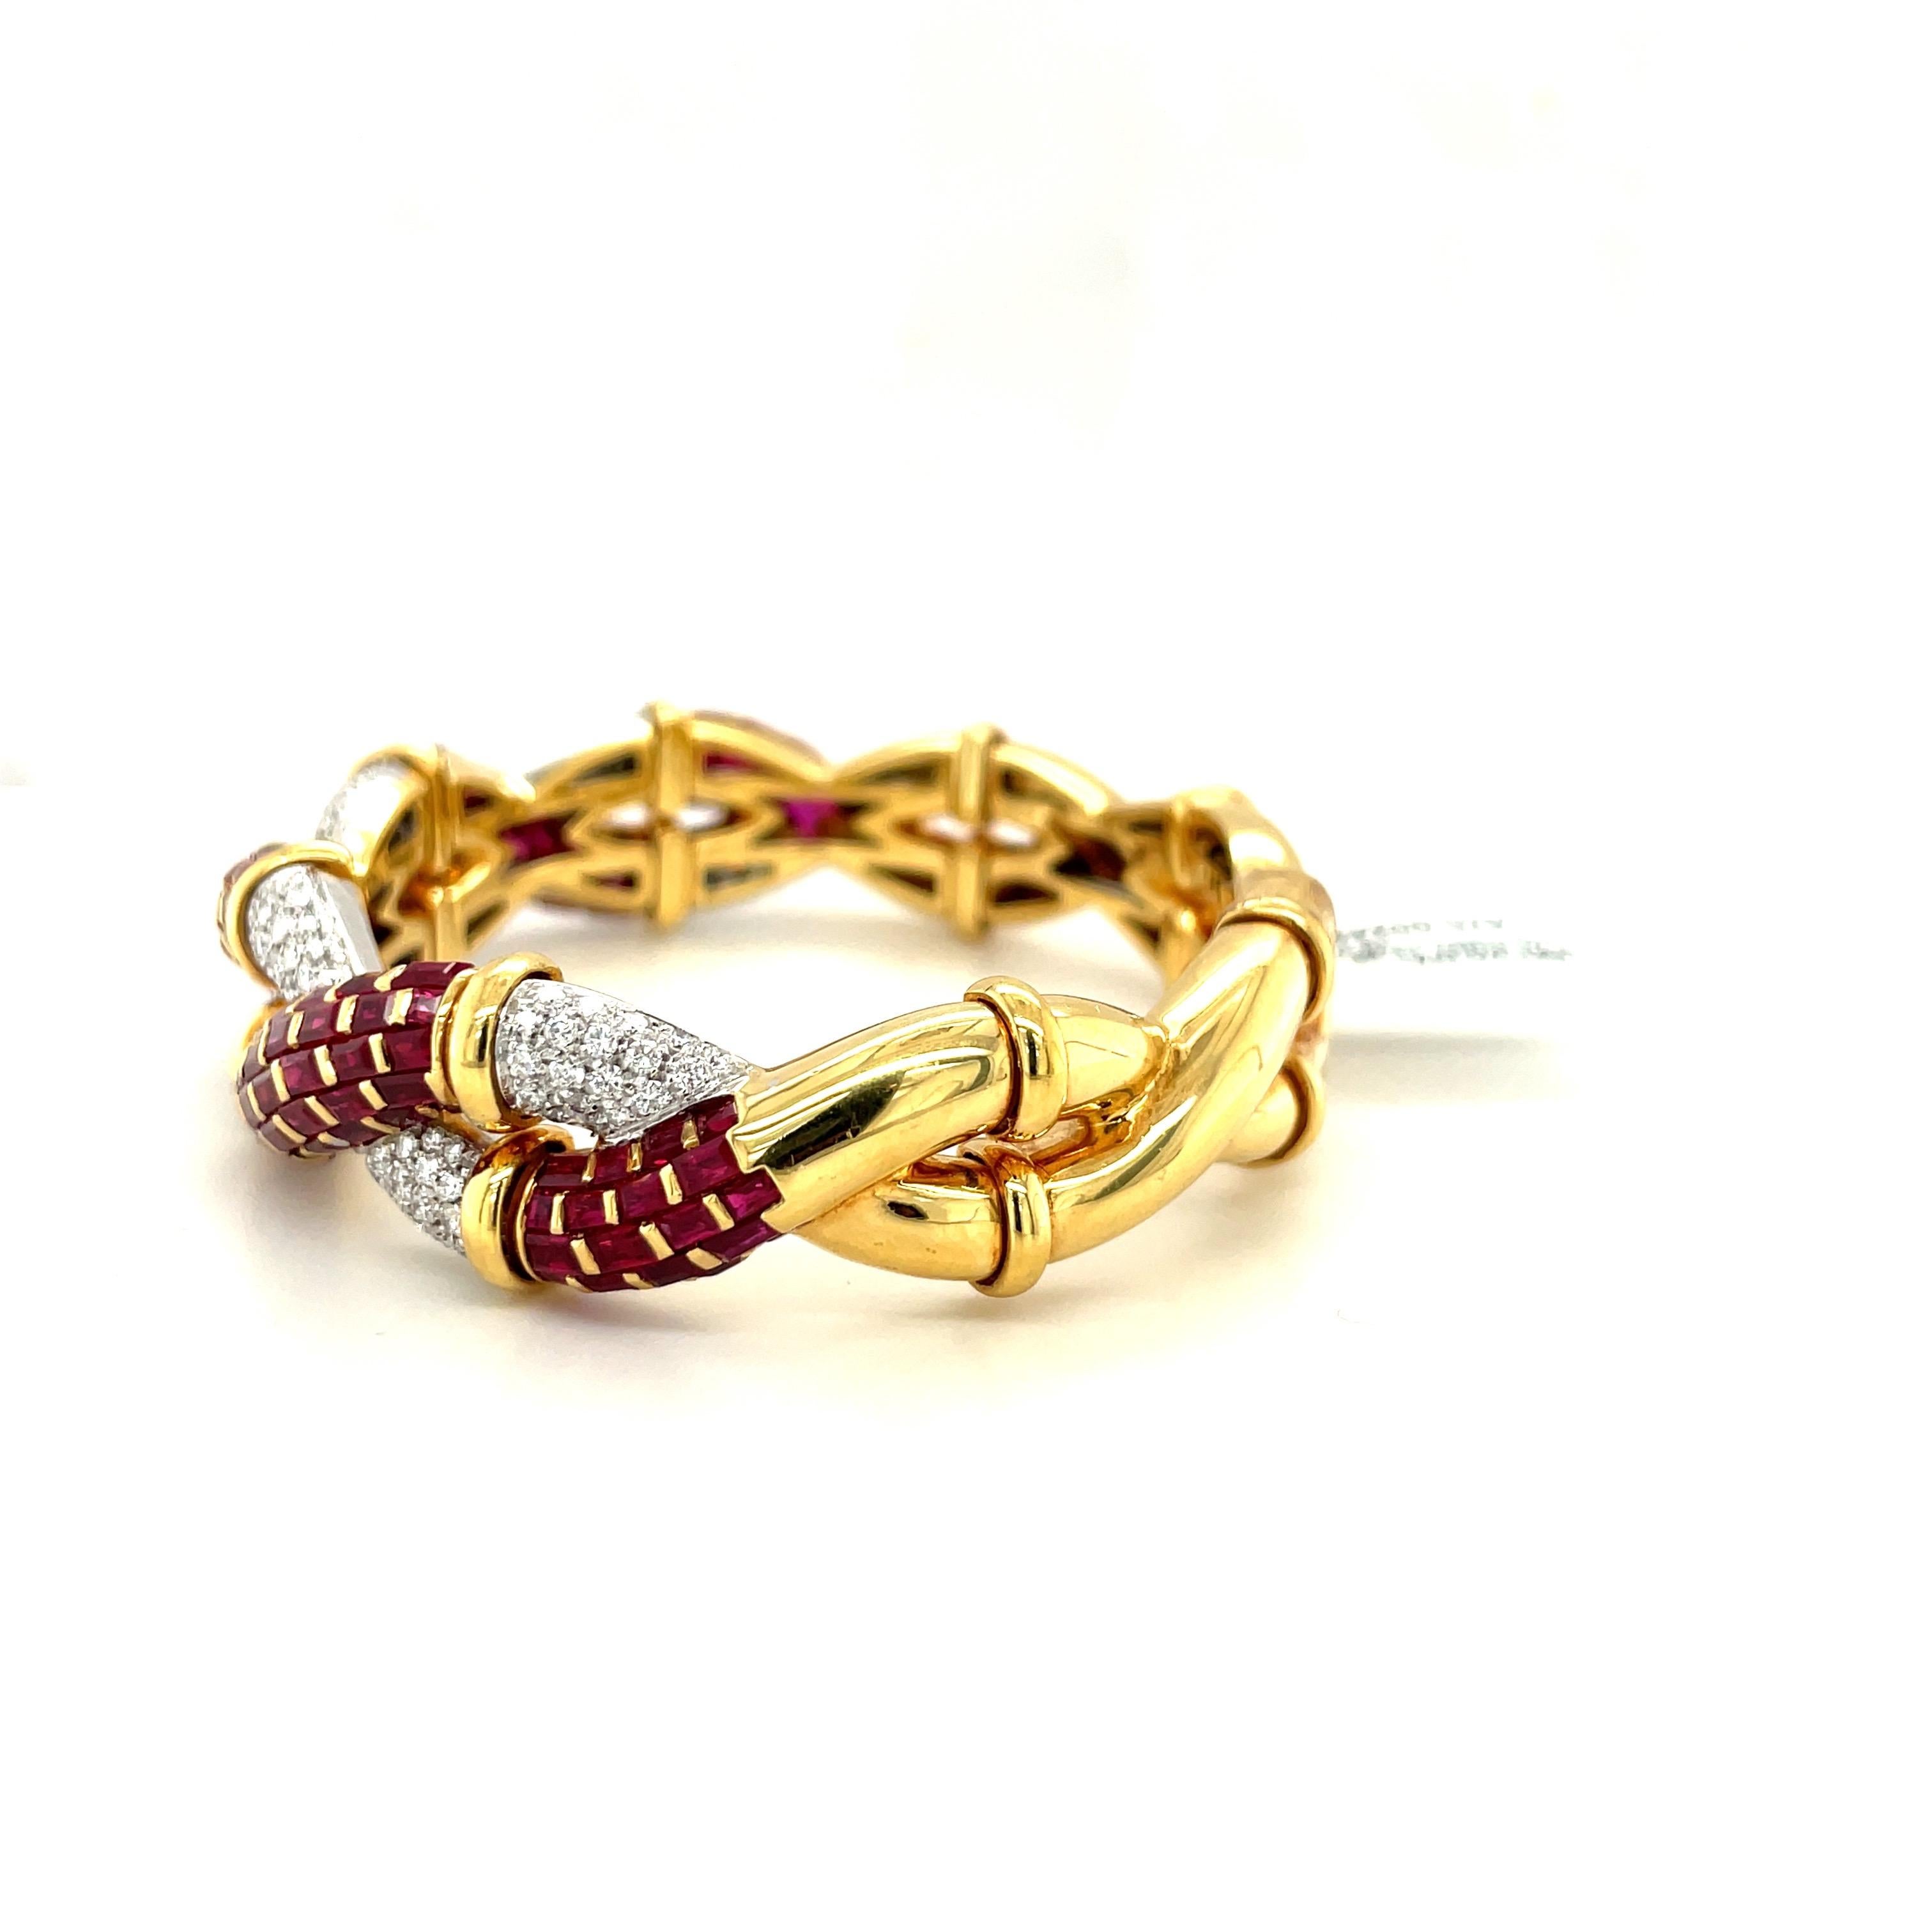 R.C.M. 18KT Yellow Gold 13.39Ct Ruby 1.70Ct Diamond Braided Cuff Bracelet In New Condition For Sale In New York, NY